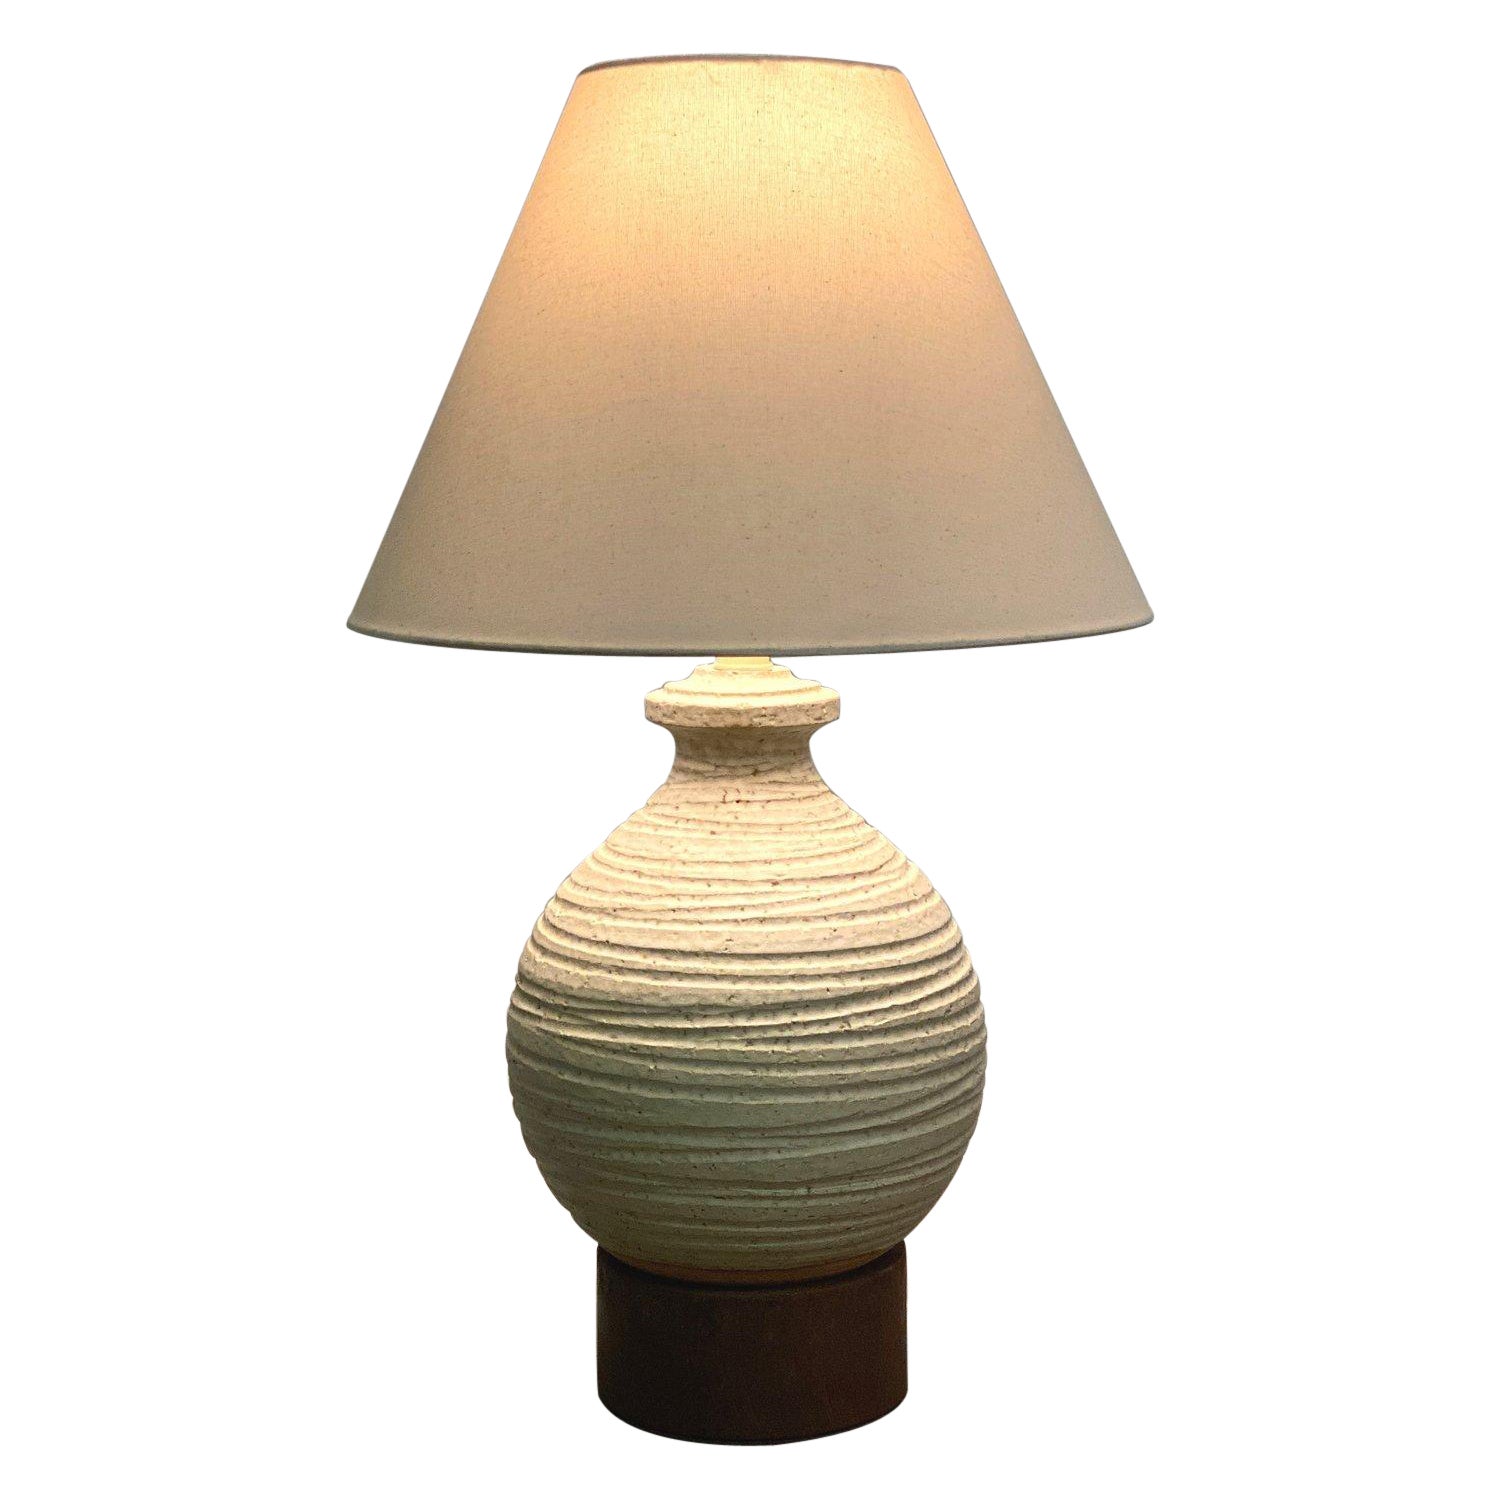 Vintage Greige Pietra Decor Series Terracotta Lamp by Bitossi, Circa 1950 For Sale